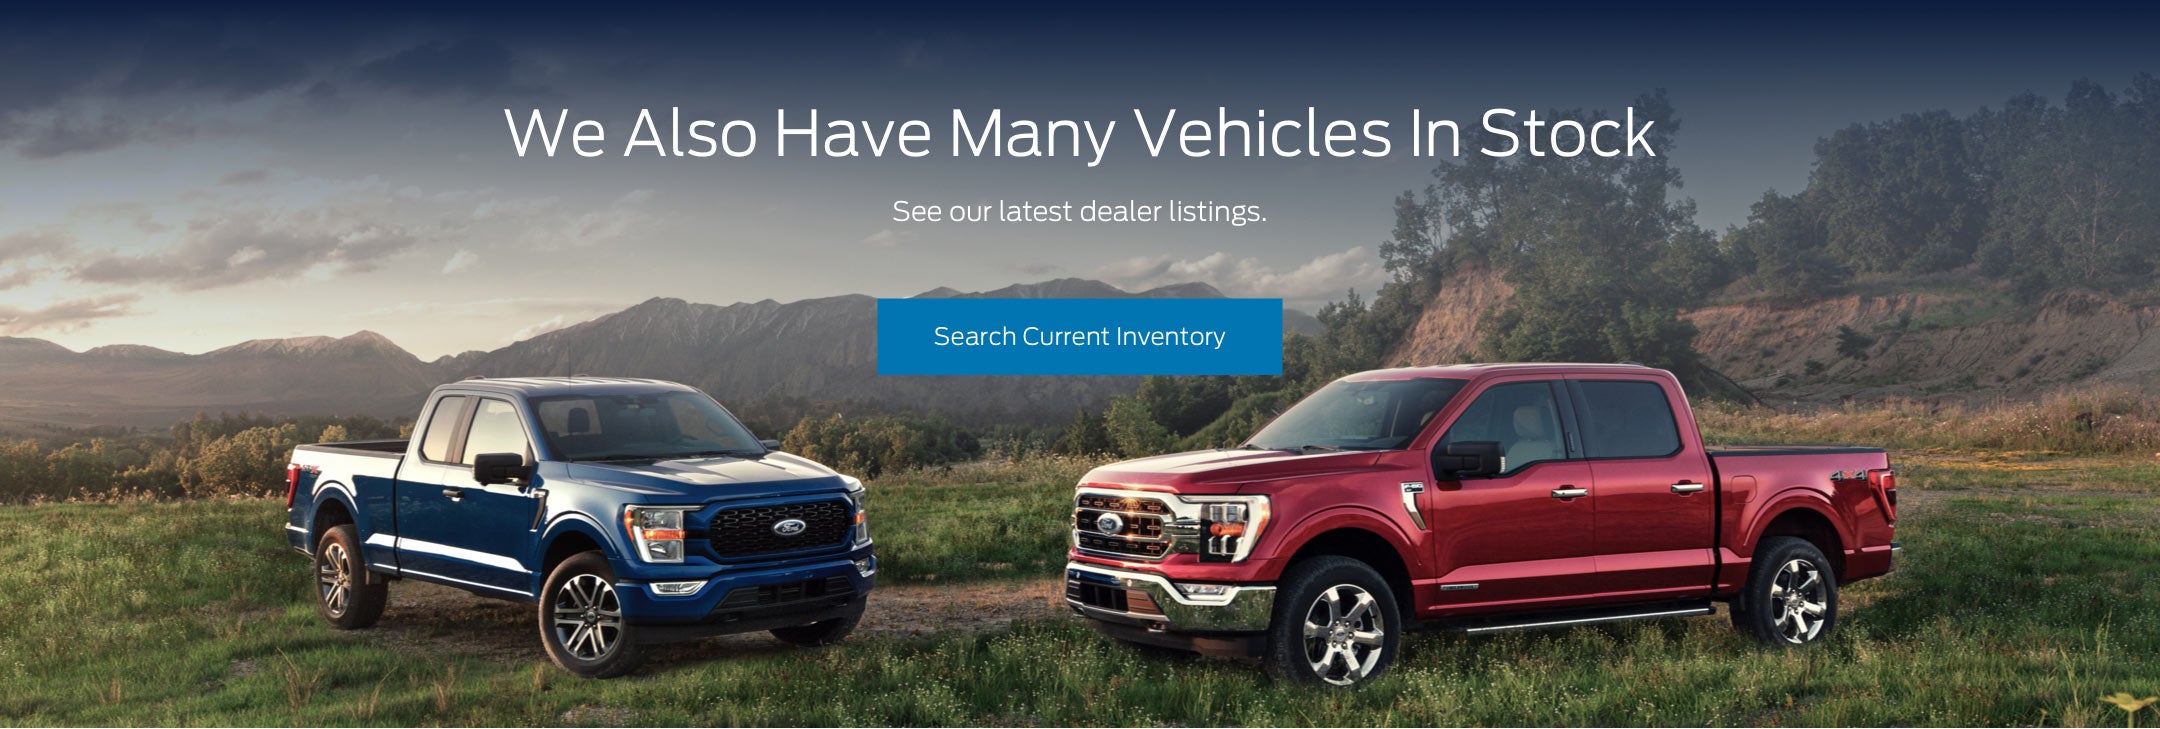 Ford vehicles in stock | Bob Thomas Ford Inc in Hamden CT